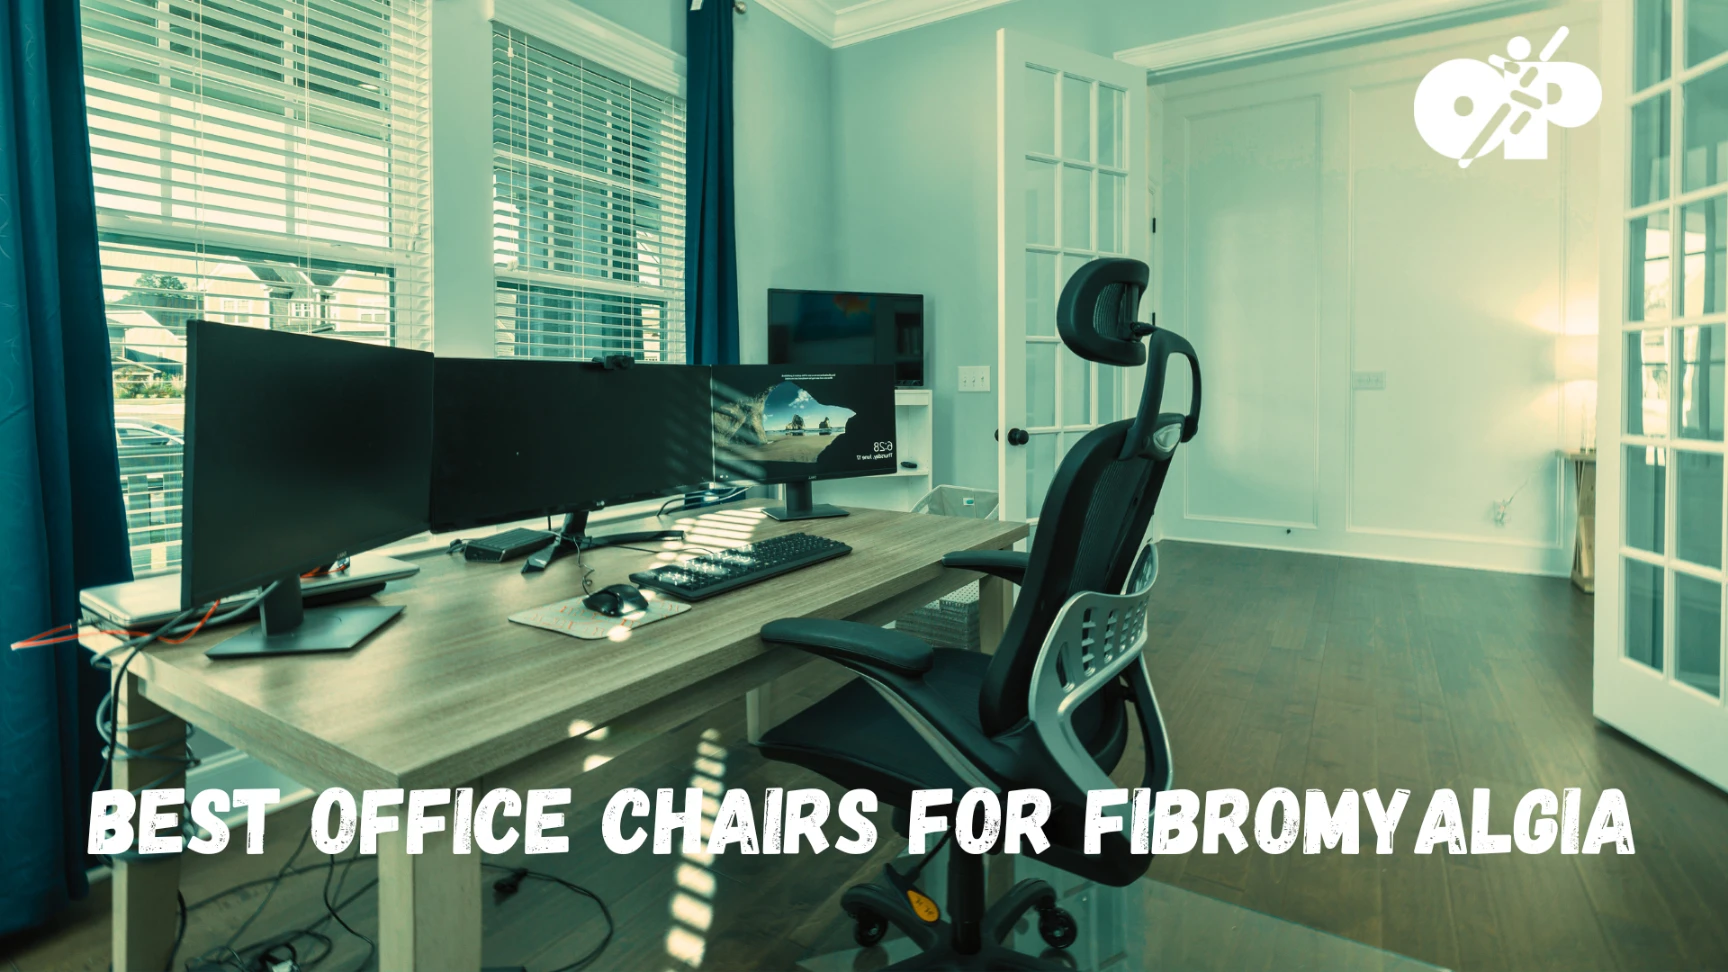 Best Office Chairs for Fibromyalgia